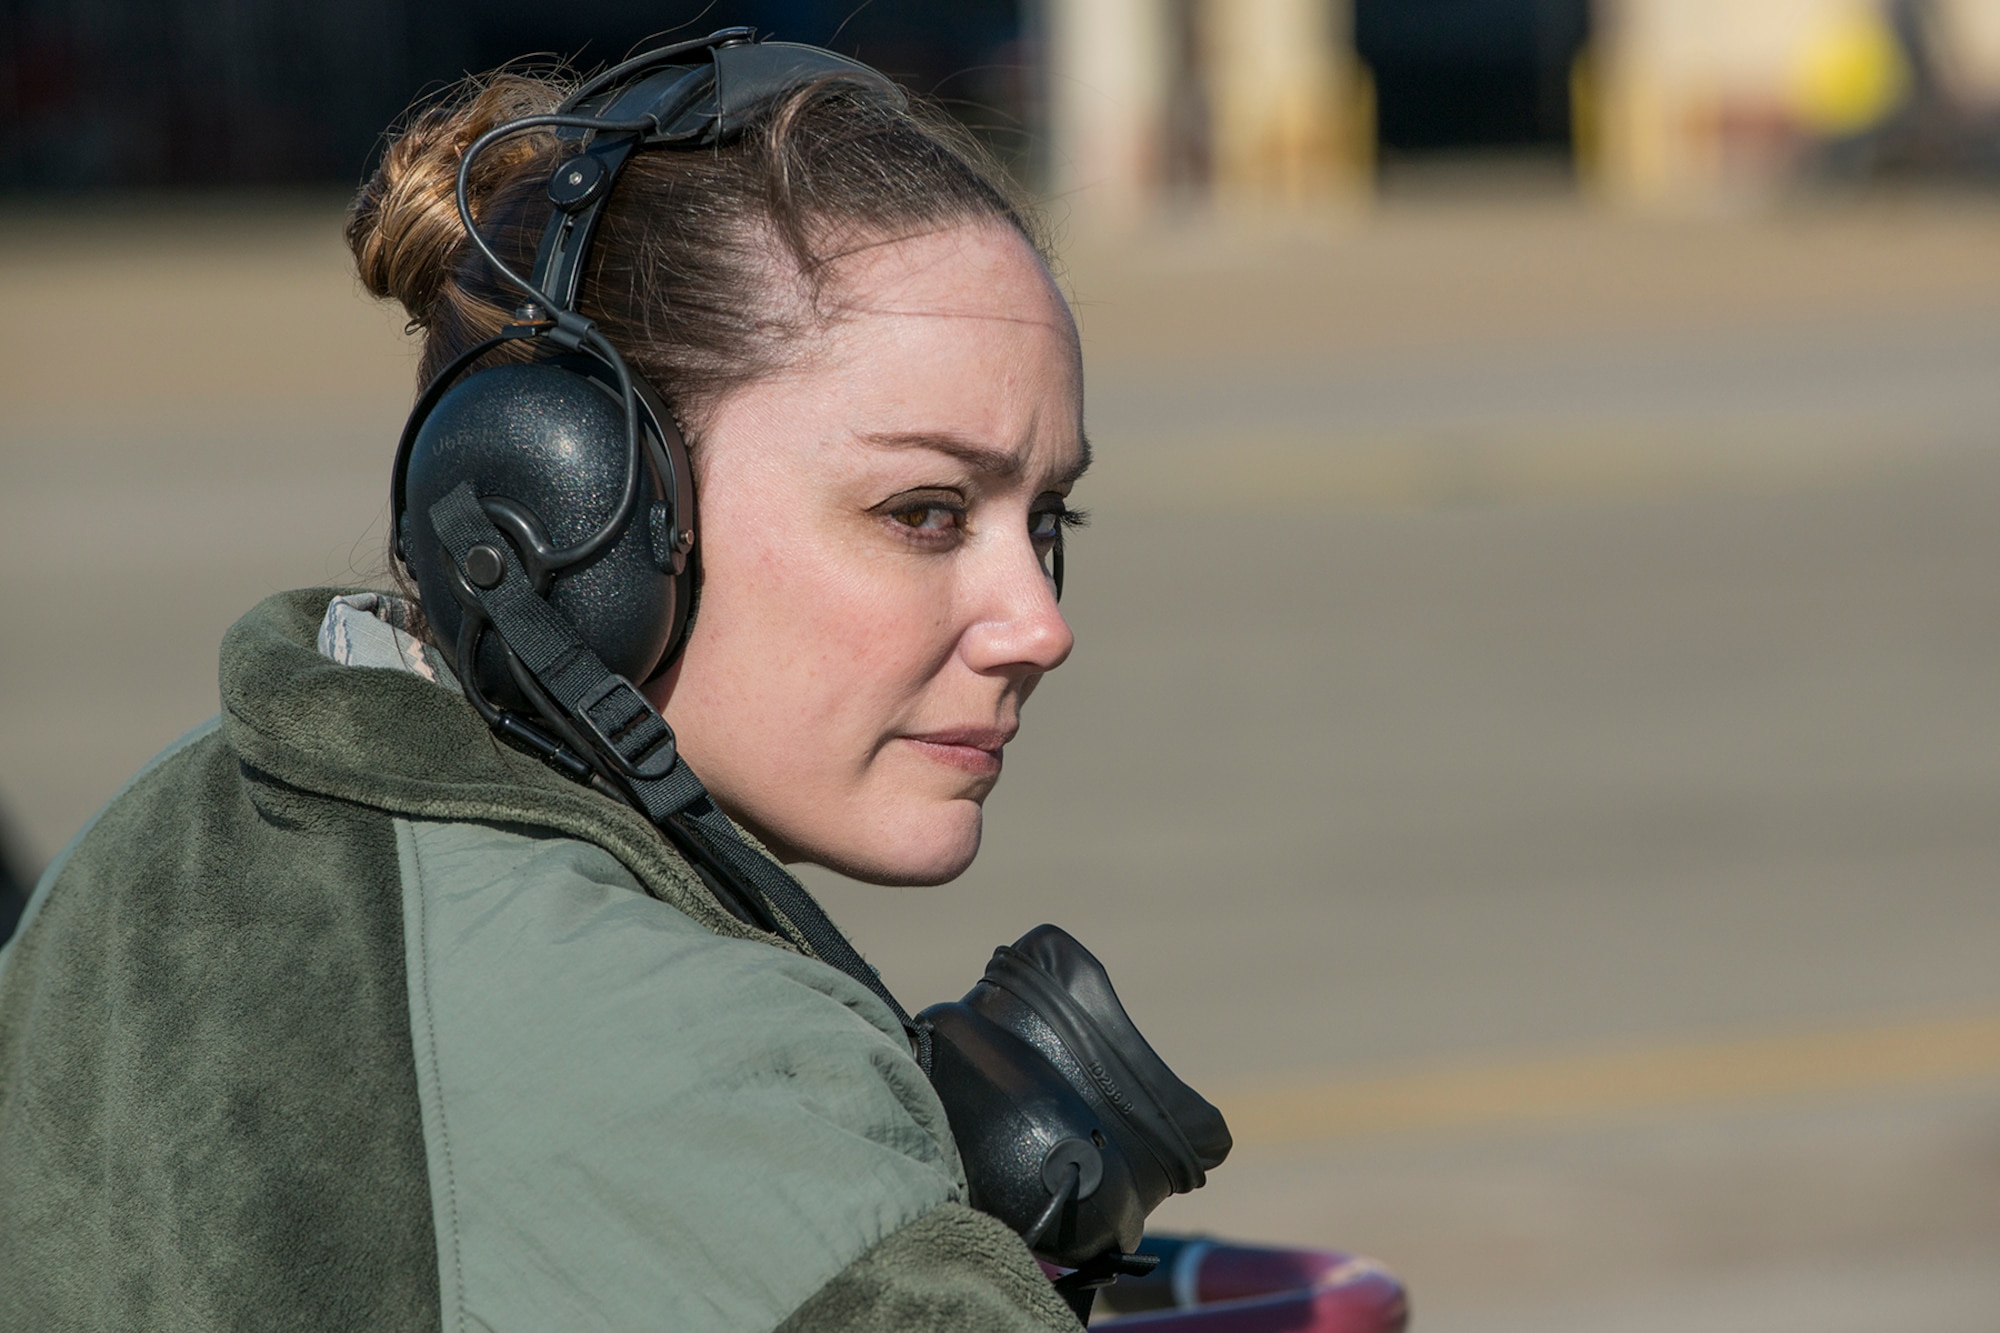 U.S. Air Force Tech. Sgt. Megan Nelson, 2nd Maintenance Squadron crew chief, prepares to marshal a B-52H Stratofortress from its parking spot for a mission on Mar. 22, 2013, Barksdale Air Force Base, La. In recognition of Women’s History Month, the Air Force Reserve Command’s 307th Bomb Wing and Barksdale’s 2nd Bomb Wing launched two B-52H Stratofortress bombers flown by two all-female aircrews made up from members of the Air Force Reserve Command’s 93rd and 343rd Bomb Squadrons and the 2nd Bomb Wing’s 11th, 20th and 96th Bomb Squadrons. (U.S. Air Force photo by Master Sgt. Greg Steele/Released)